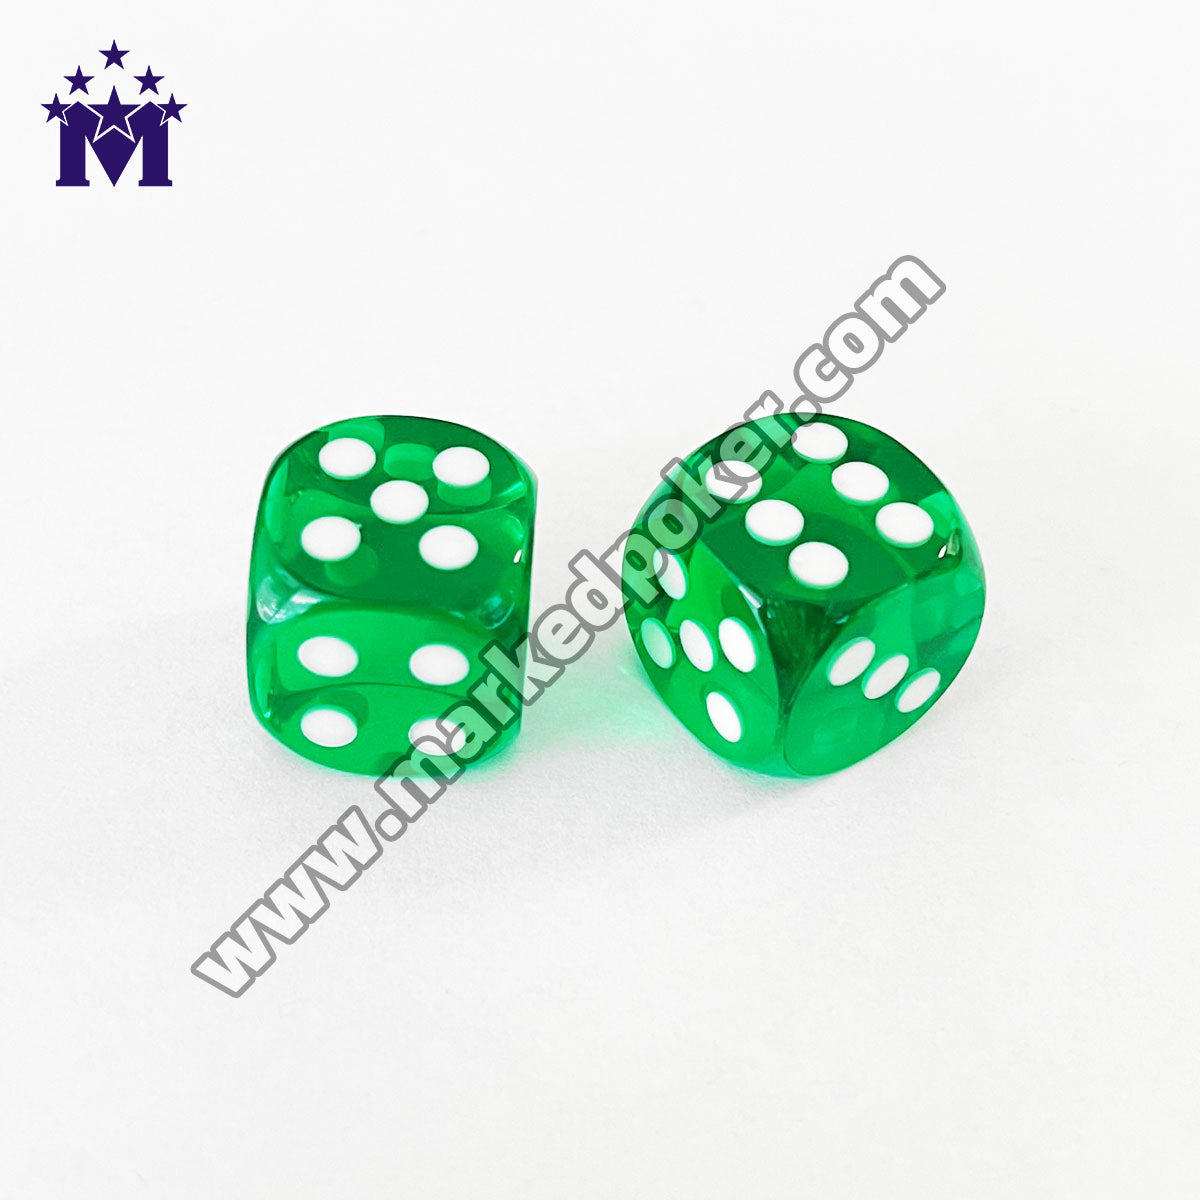 Magic Professional Dice for Cheating Device